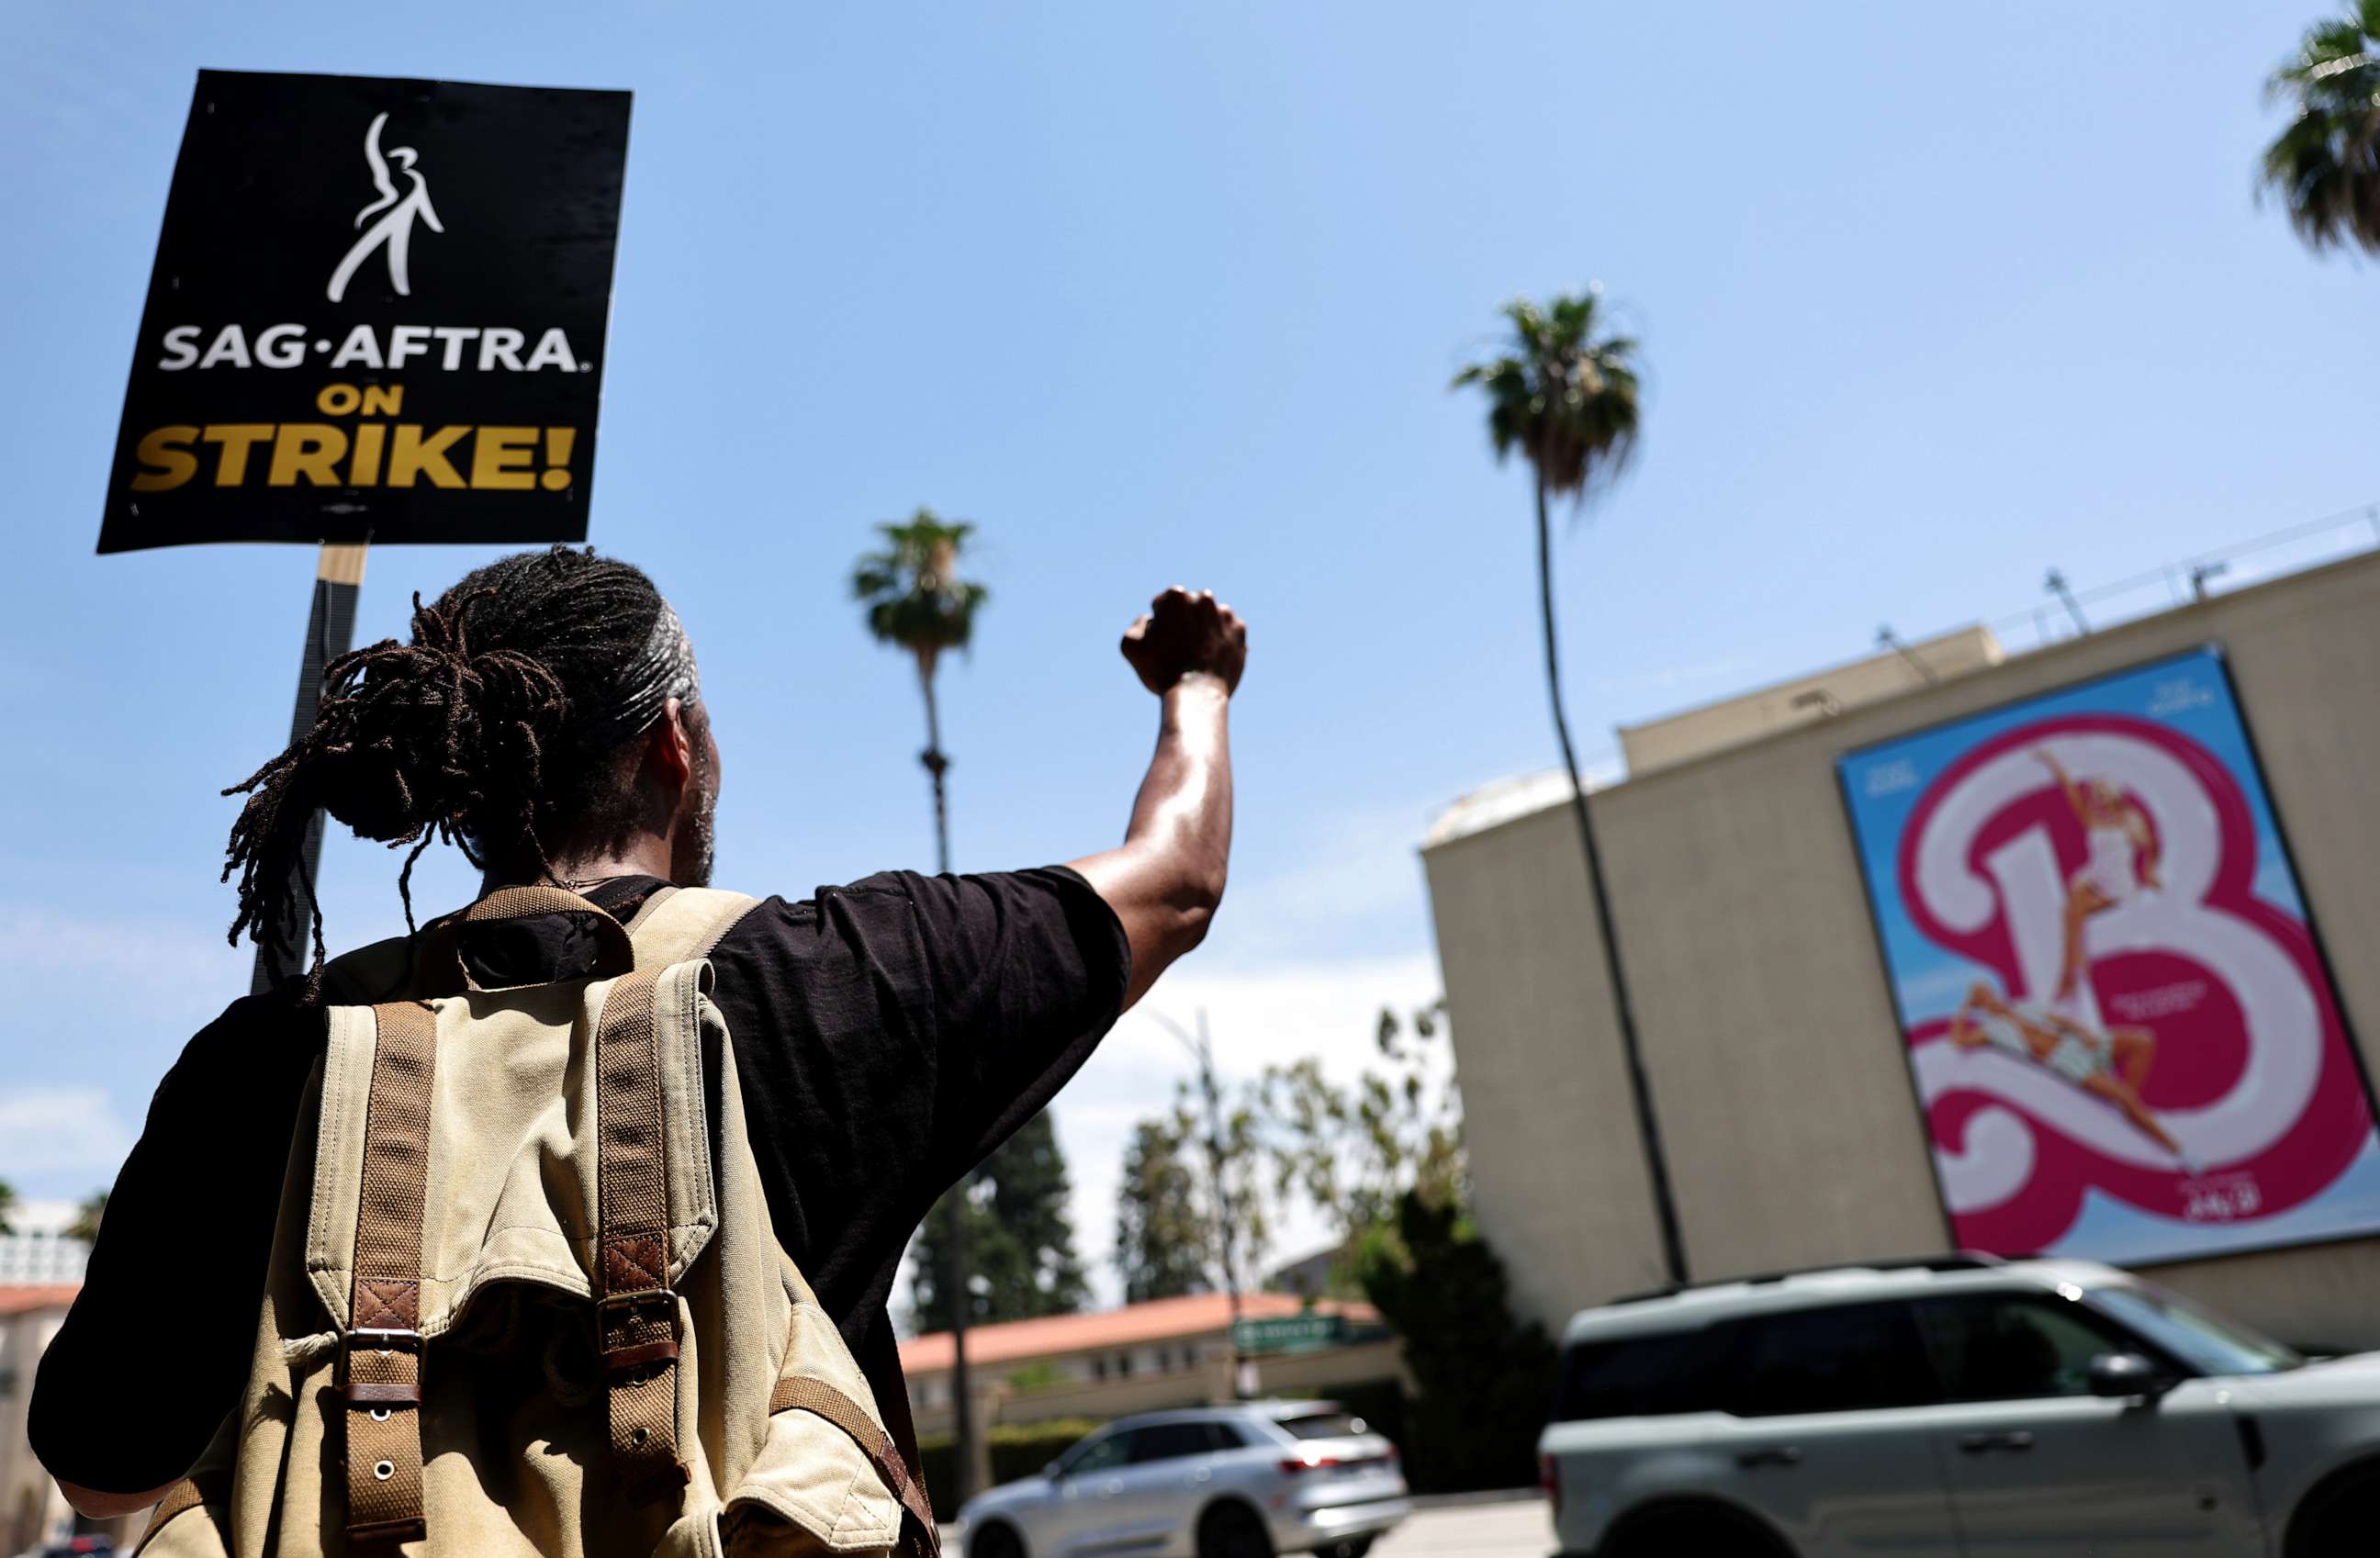 PHOTO: Striking SAG-AFTRA member James Mathis III pickets with other SAG-AFTRA members and striking WGA (Writers Guild of America) workers outside Warner Bros. Studio, near a billboard for the Barbie movie, on July 17, 2023 in Burbank, California.